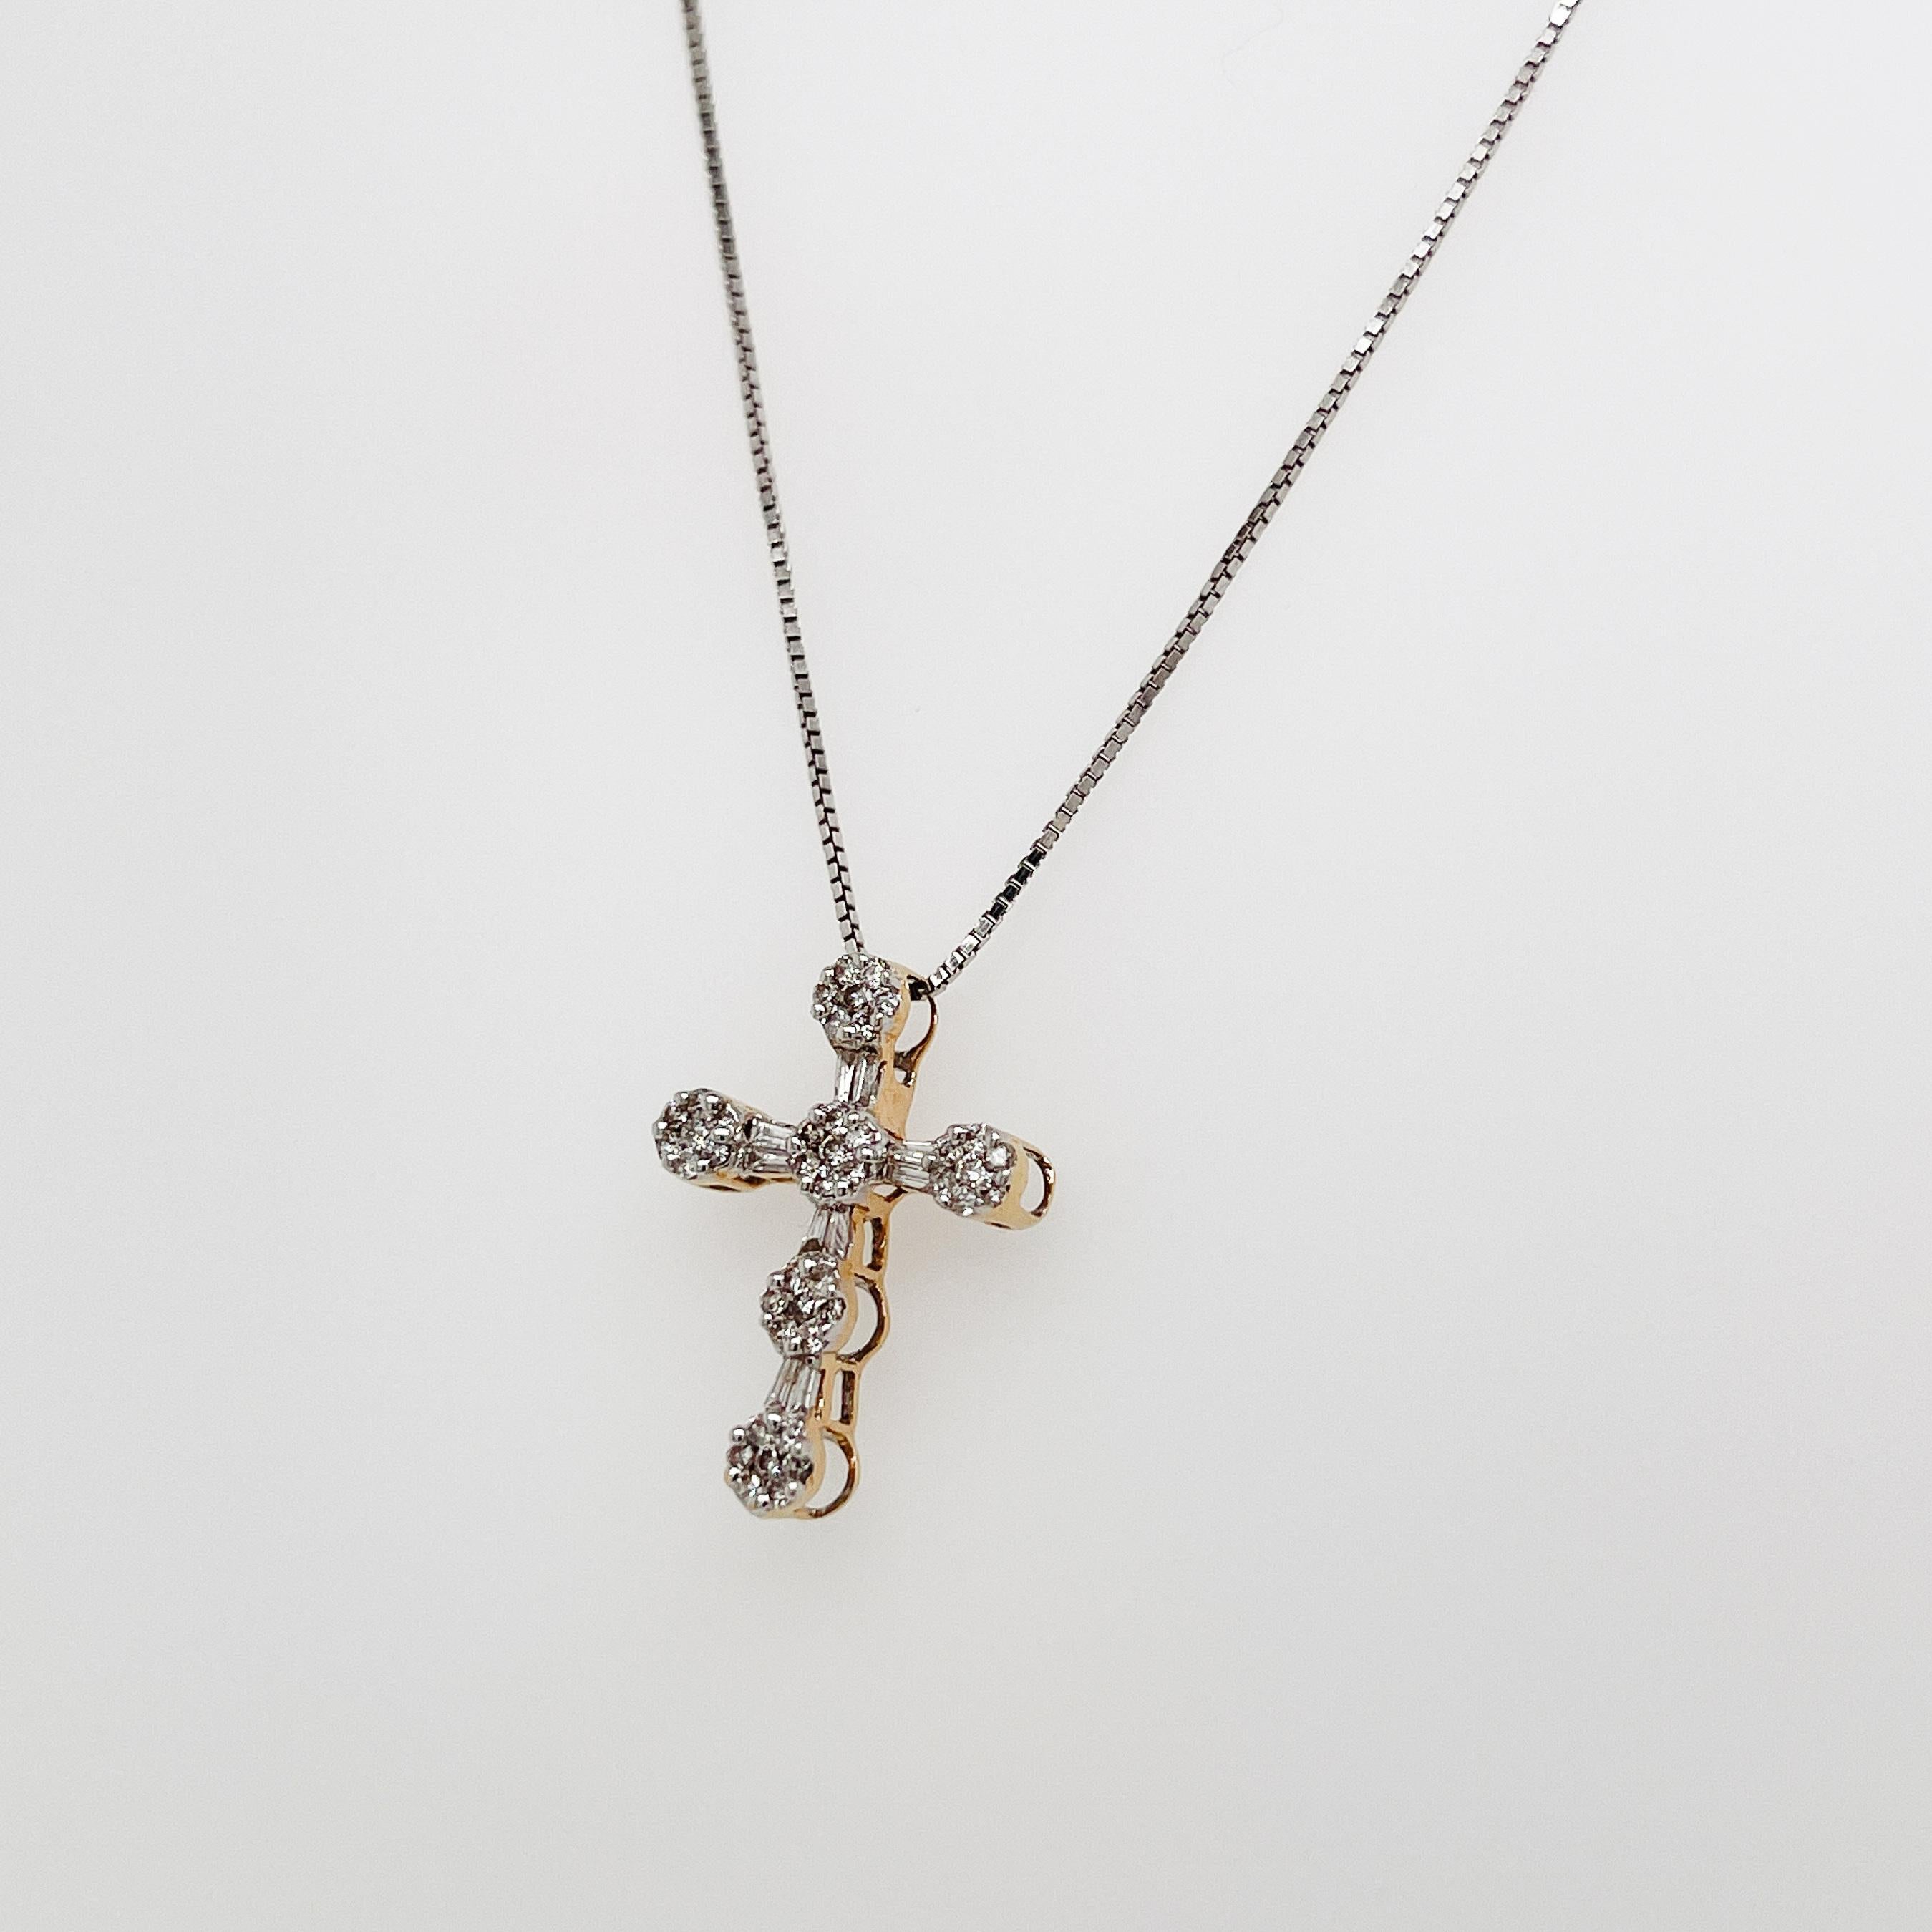 A very fine vintage estate cross pendant.

In 14k gold.

Prong-set with 42 tiny round diamonds & 10 tapered baguette cut diamonds.

Together with a 14 karat gold Italian boxchain necklace. 

Simply a wonderful crucifix!

Date:
20th Century

Overall